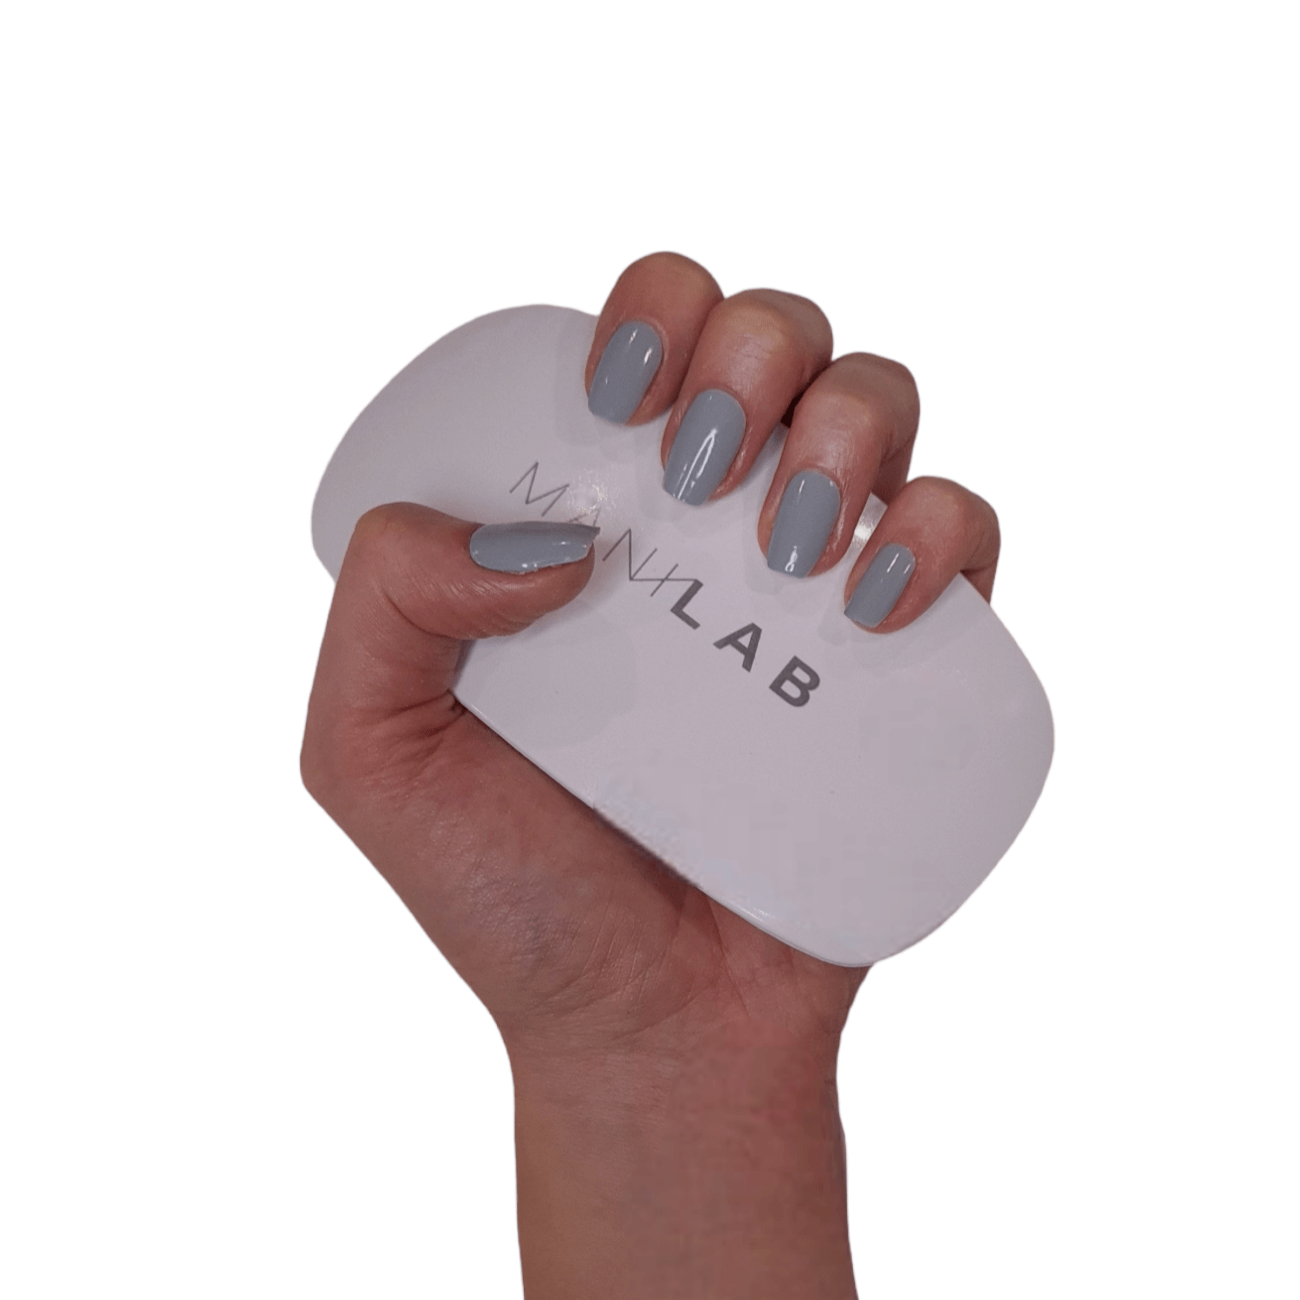 Our grey semi-cured gel nails displayed on a hand 